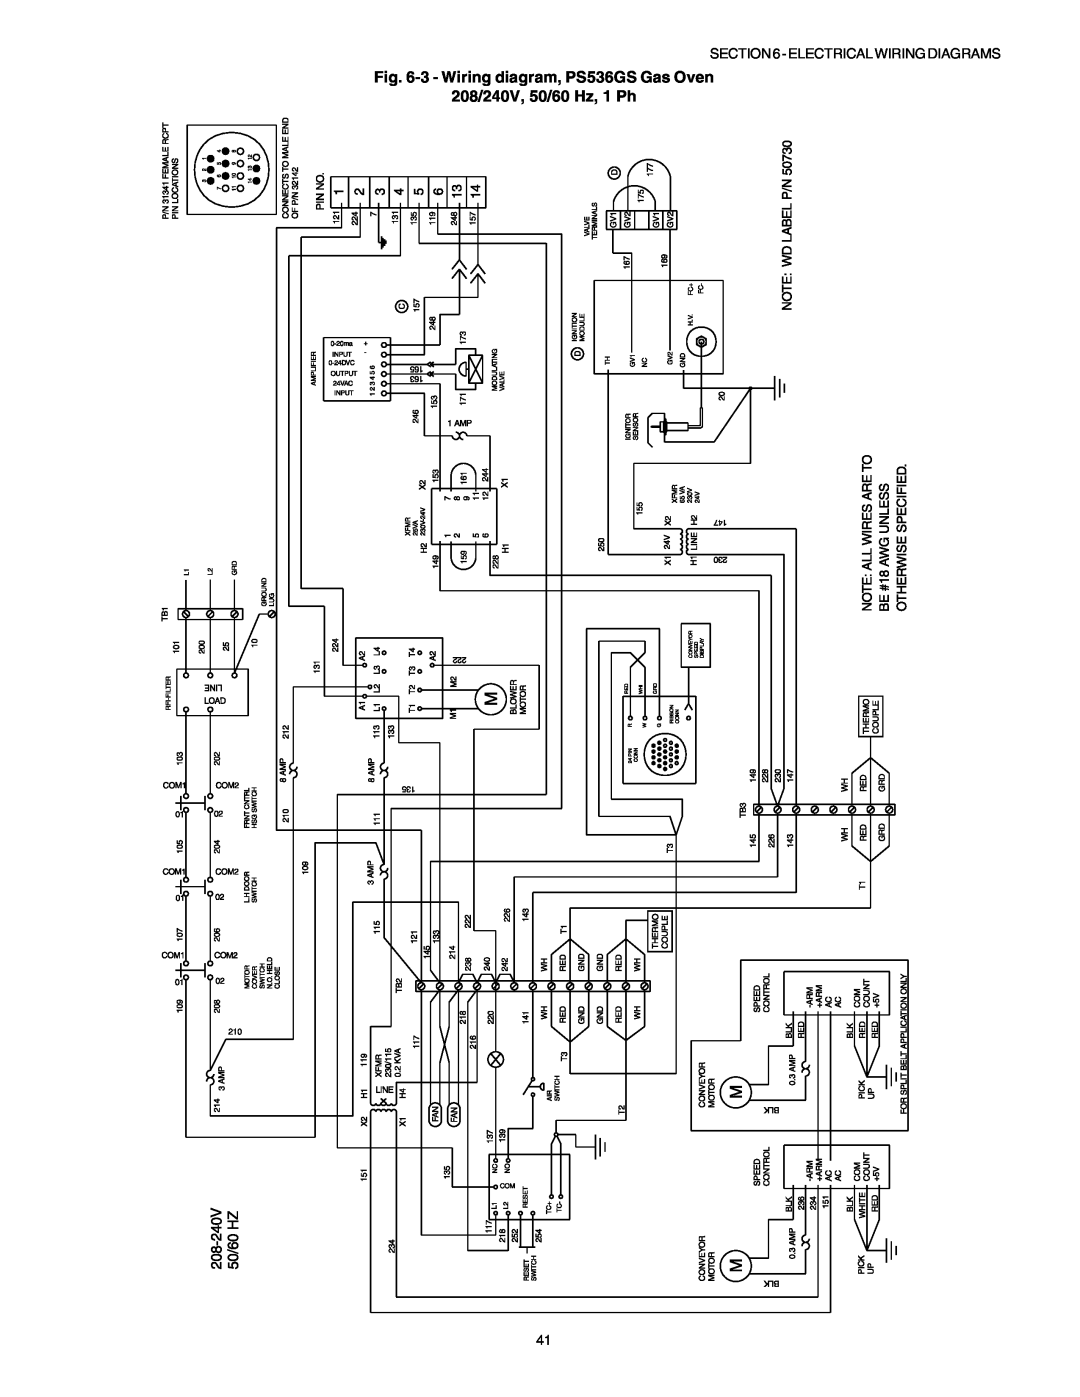 Middleby Marshall PS53GS Gas 3 - Wiring diagram, PS536GS Gas Oven 208/240V, 50/60 Hz, 1 Ph, Electrical Wiring Diagrams 